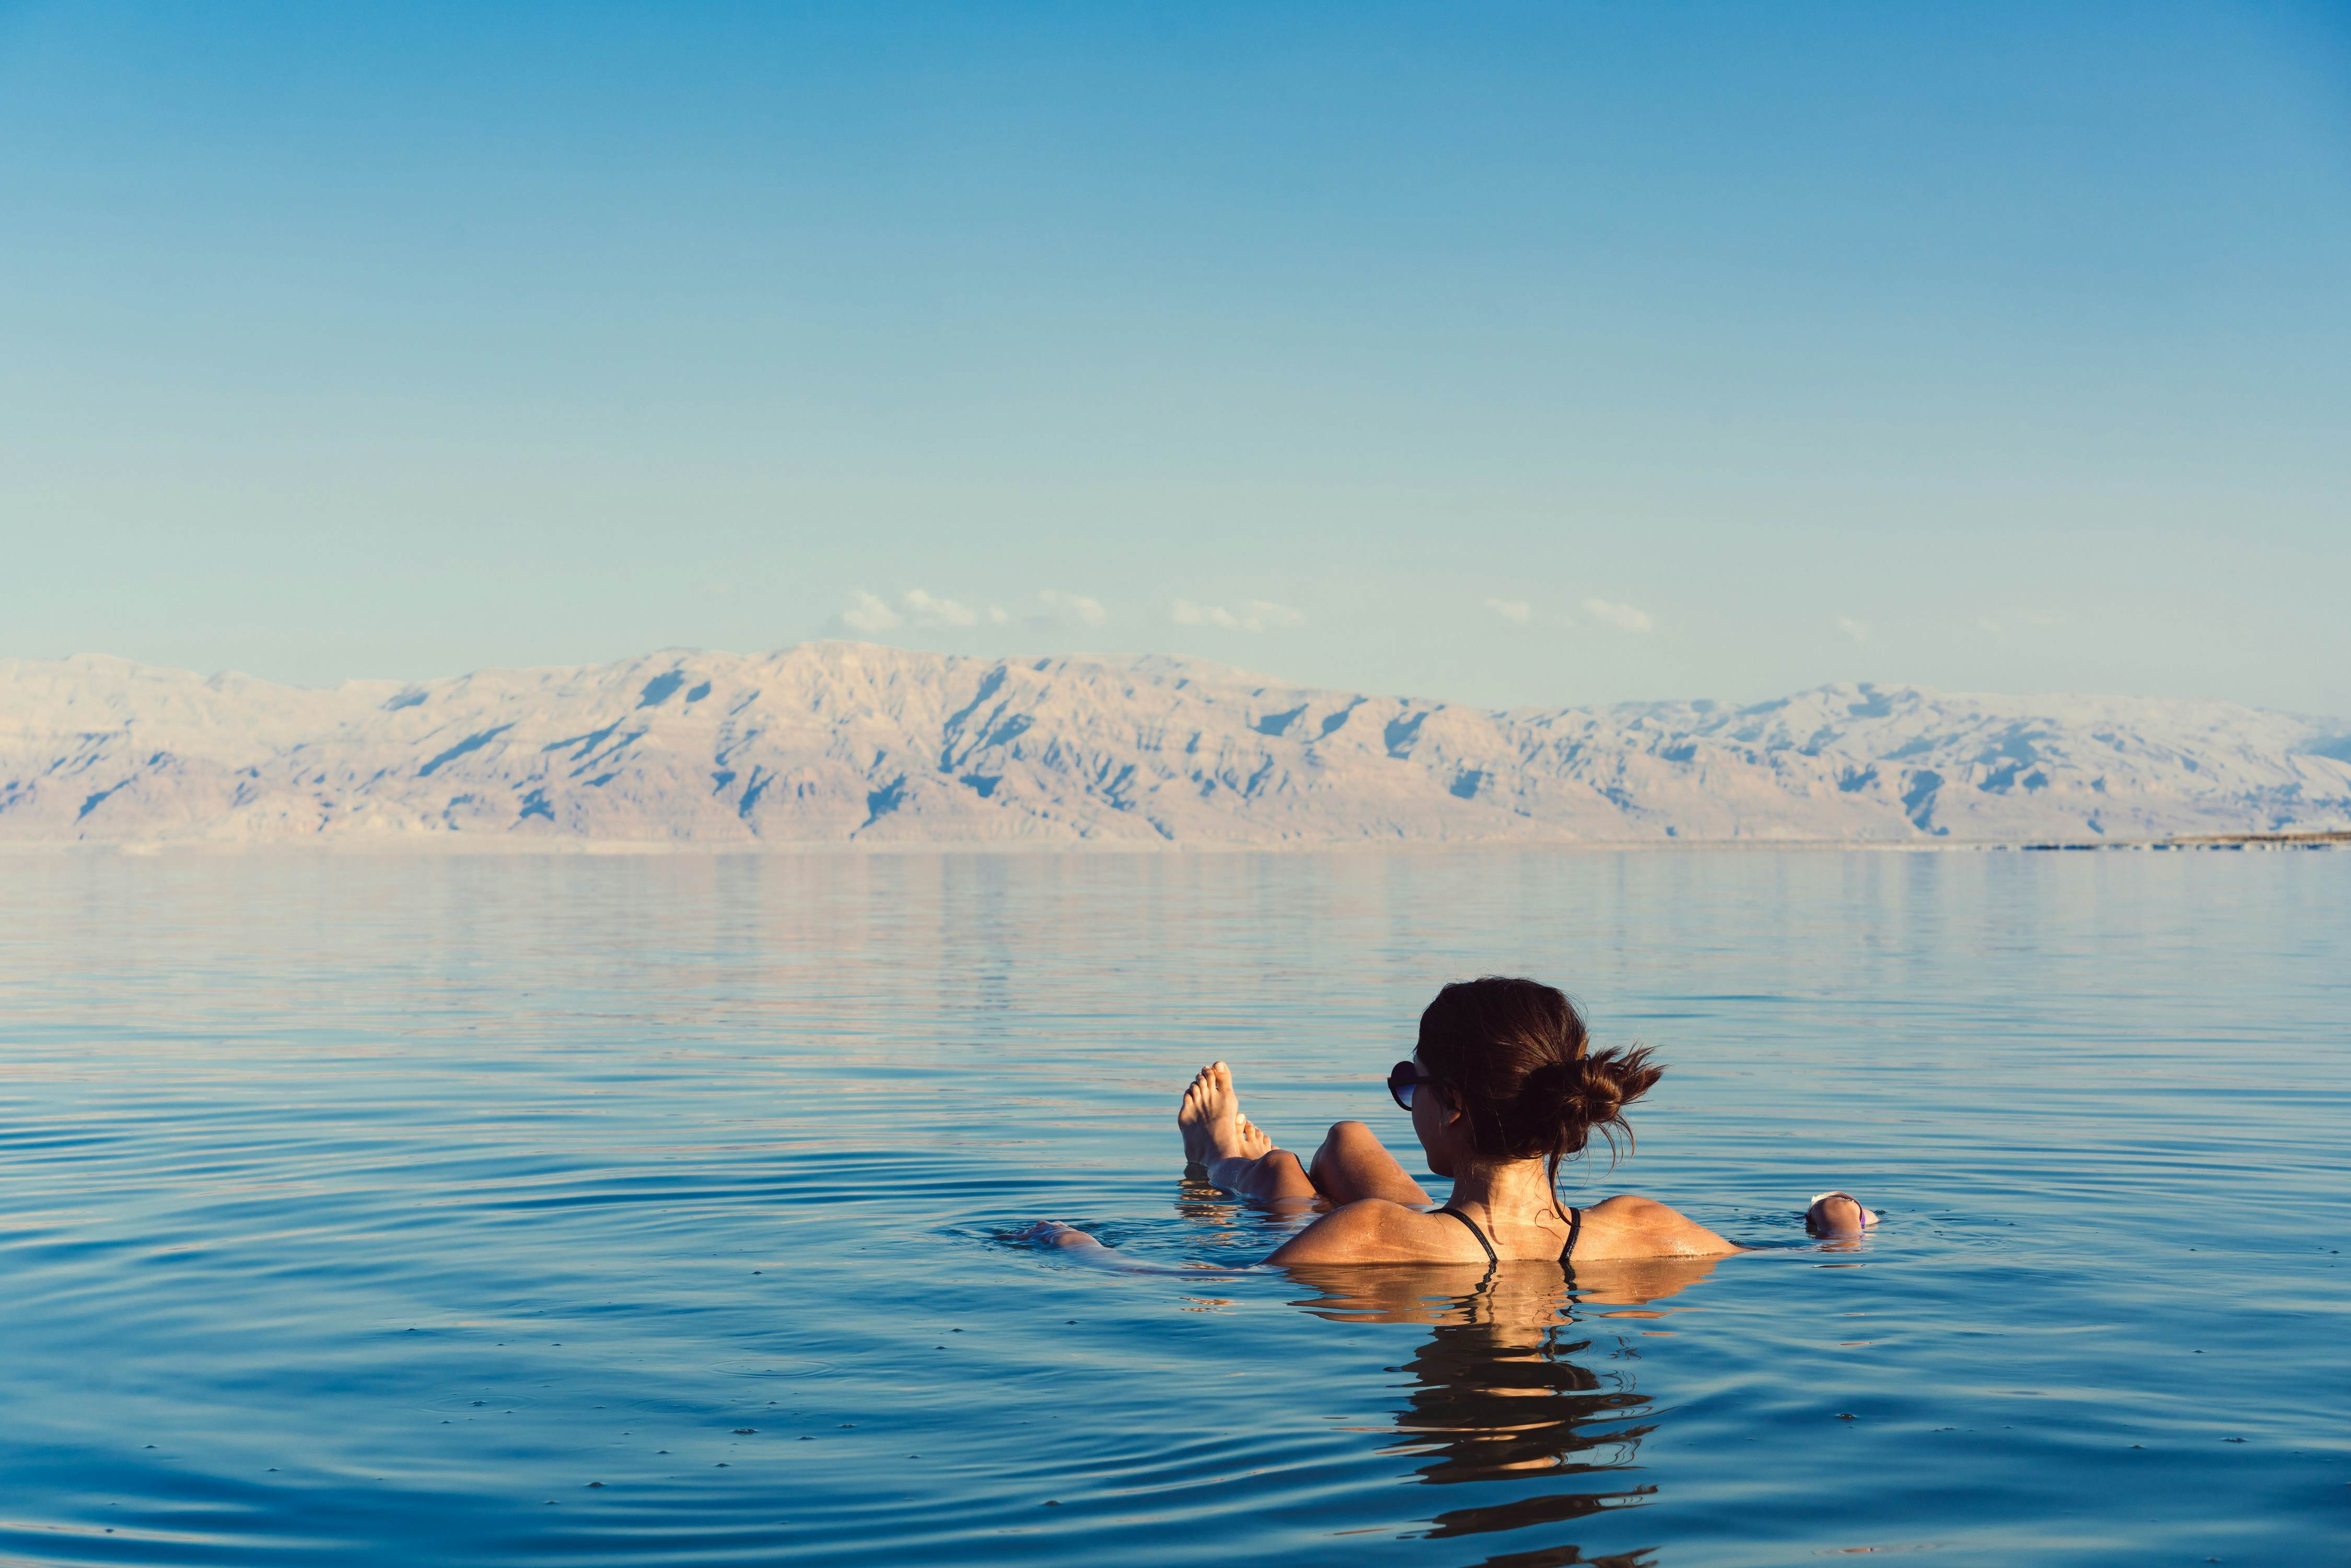 The Dead Sea on a Budget - Swimming on Jordan's side for free